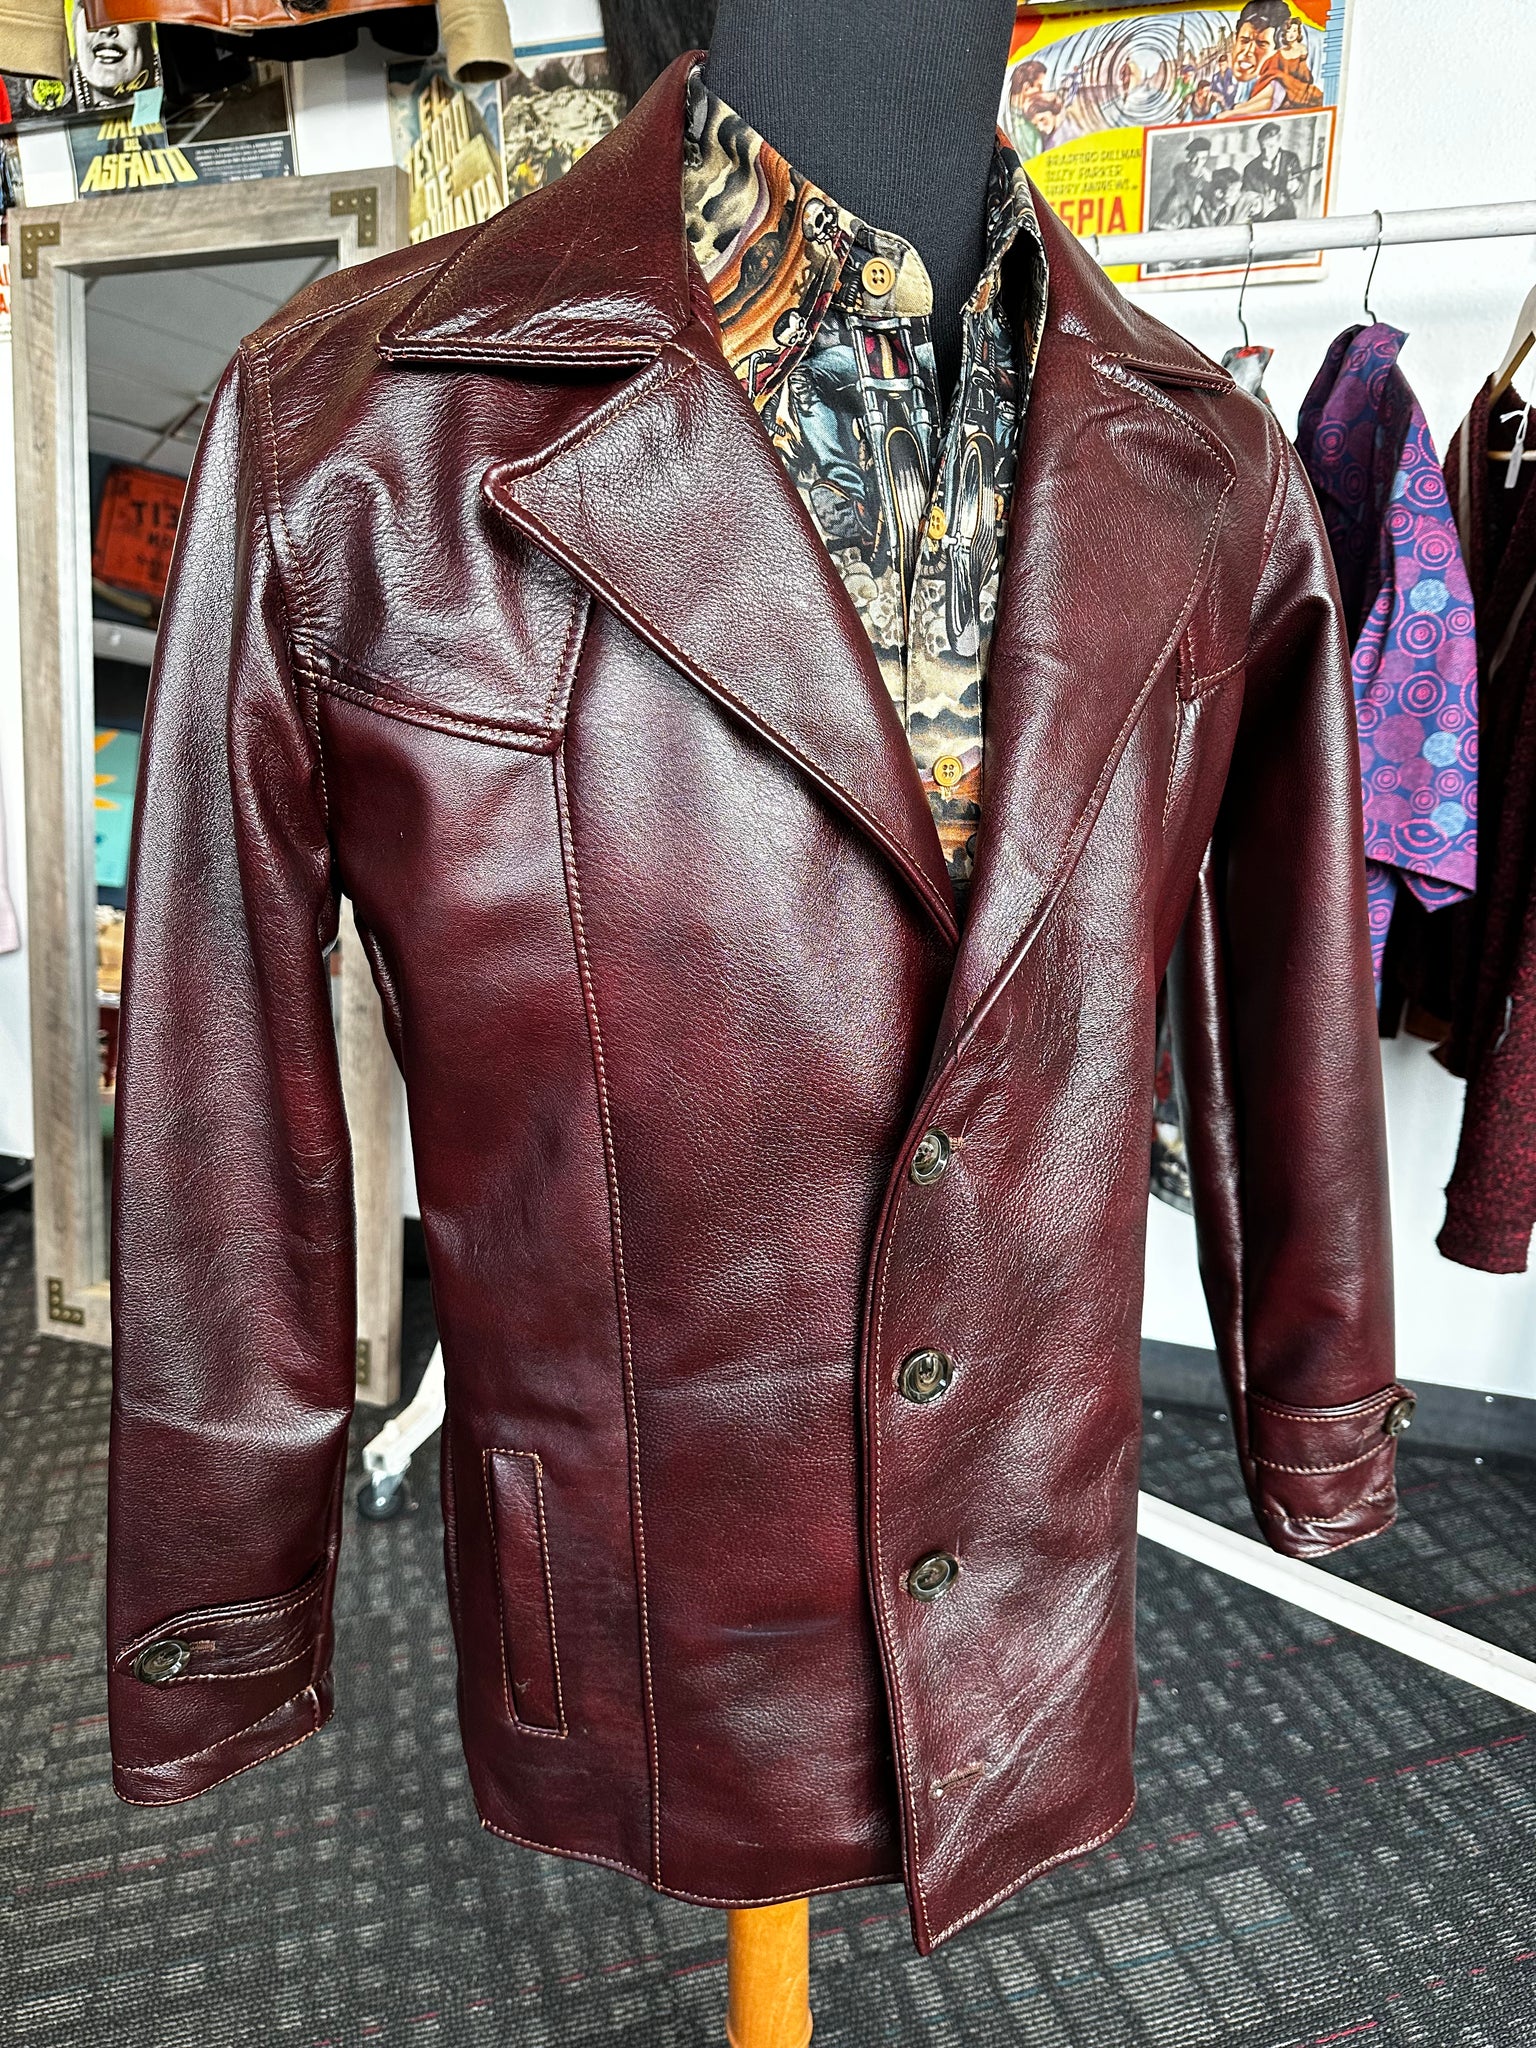 The hit man leather jacket